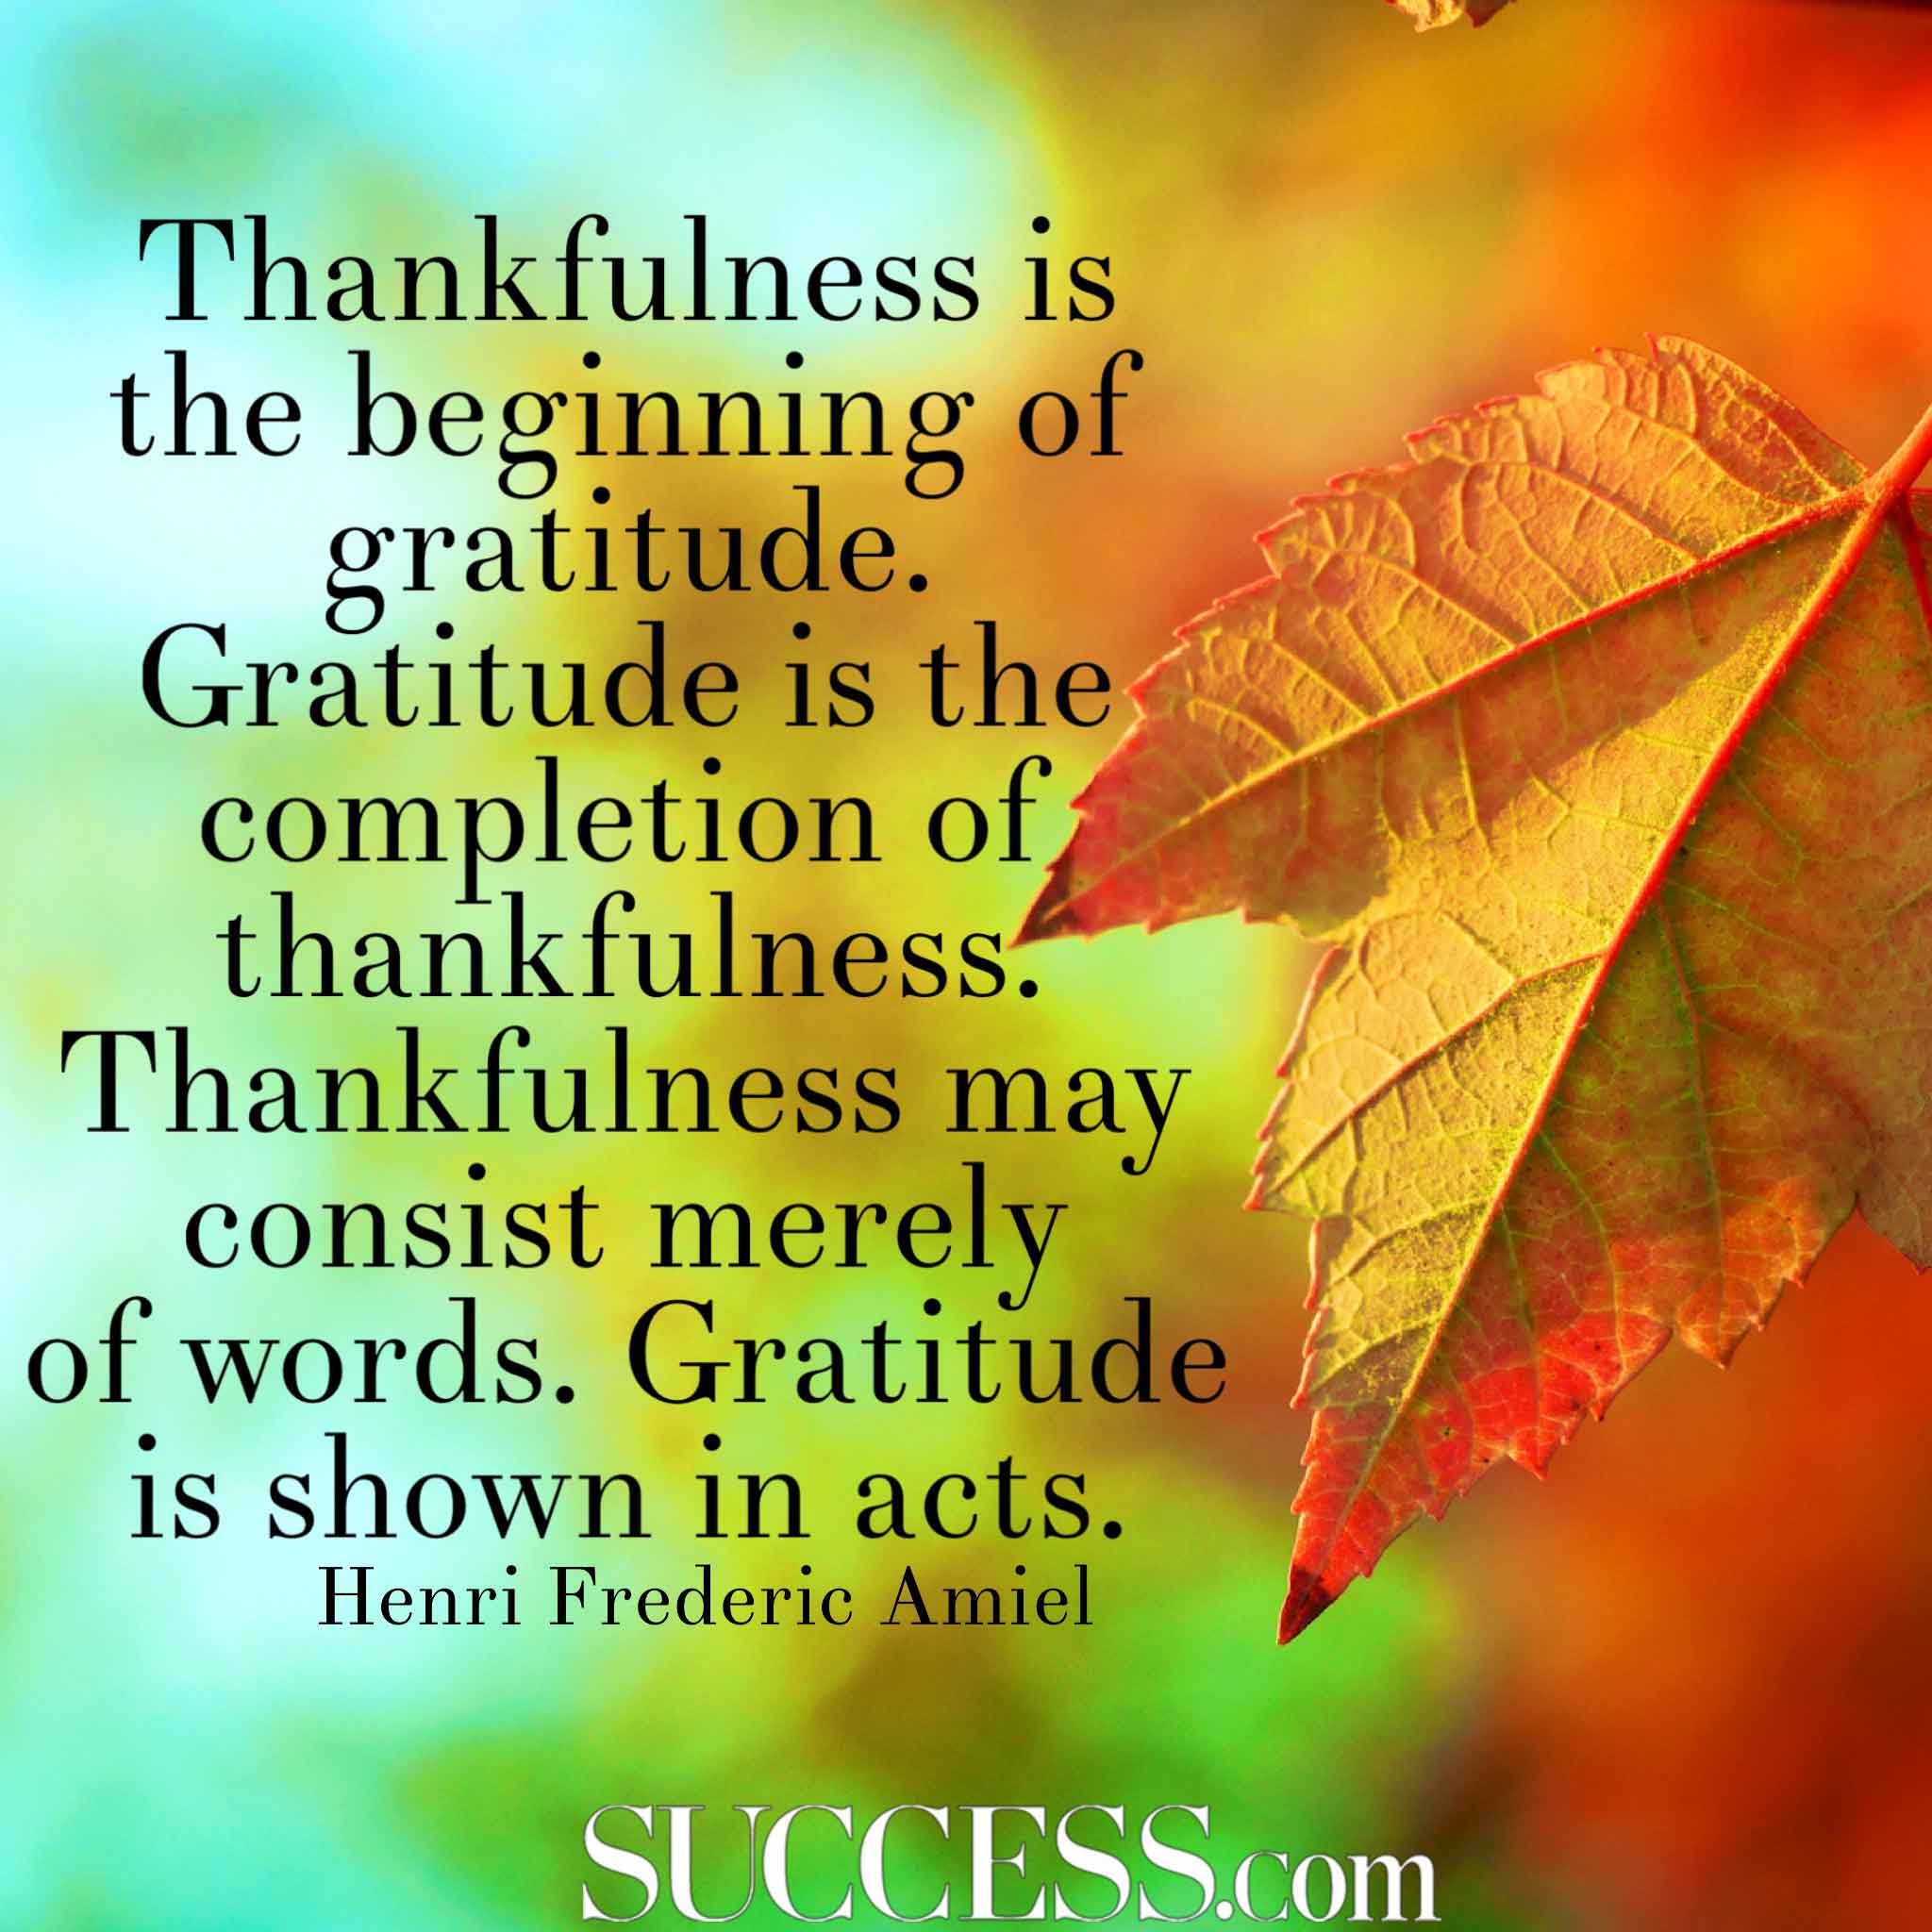 15 Thoughtful Quotes About Gratitude